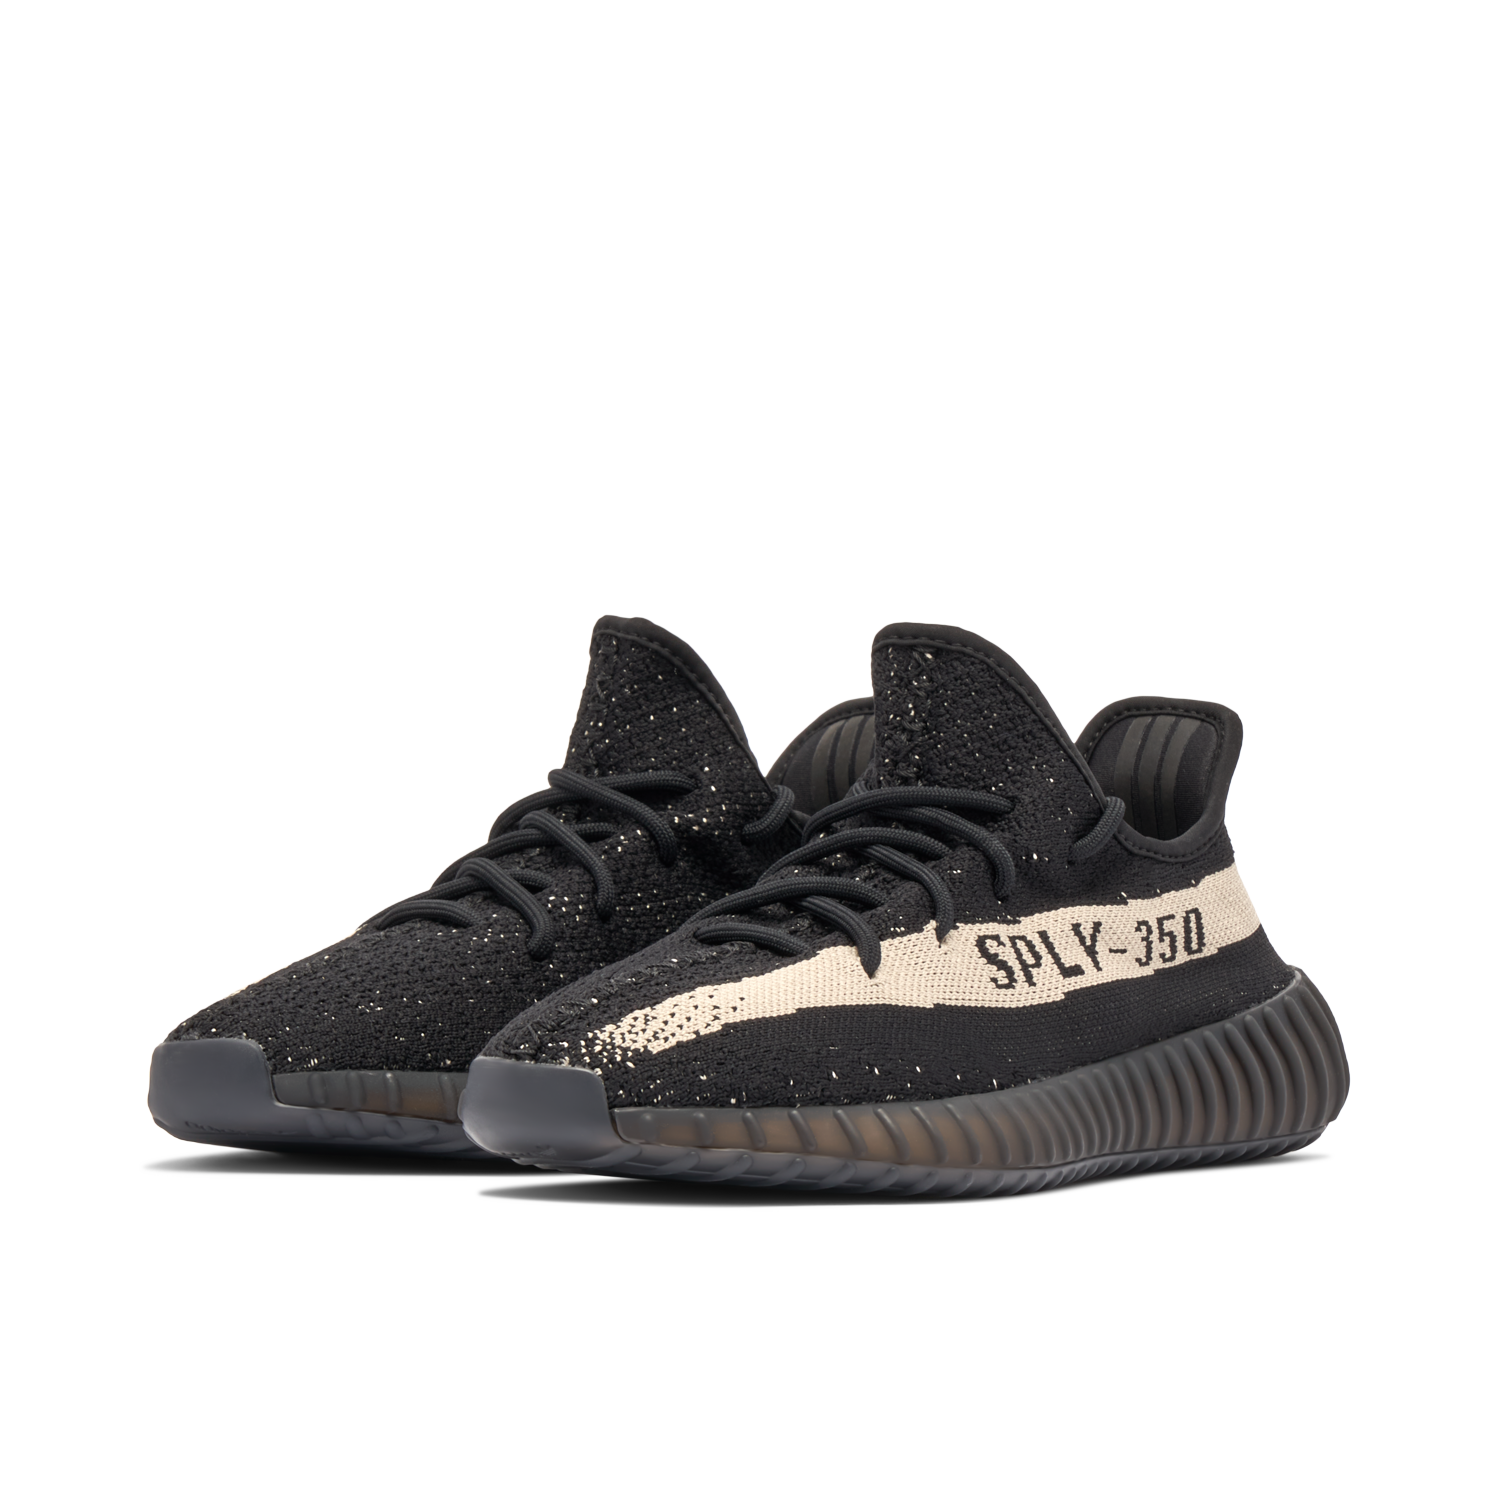 Yeezy Oreo Boost V2 | BY1604 Yeezy | Laced